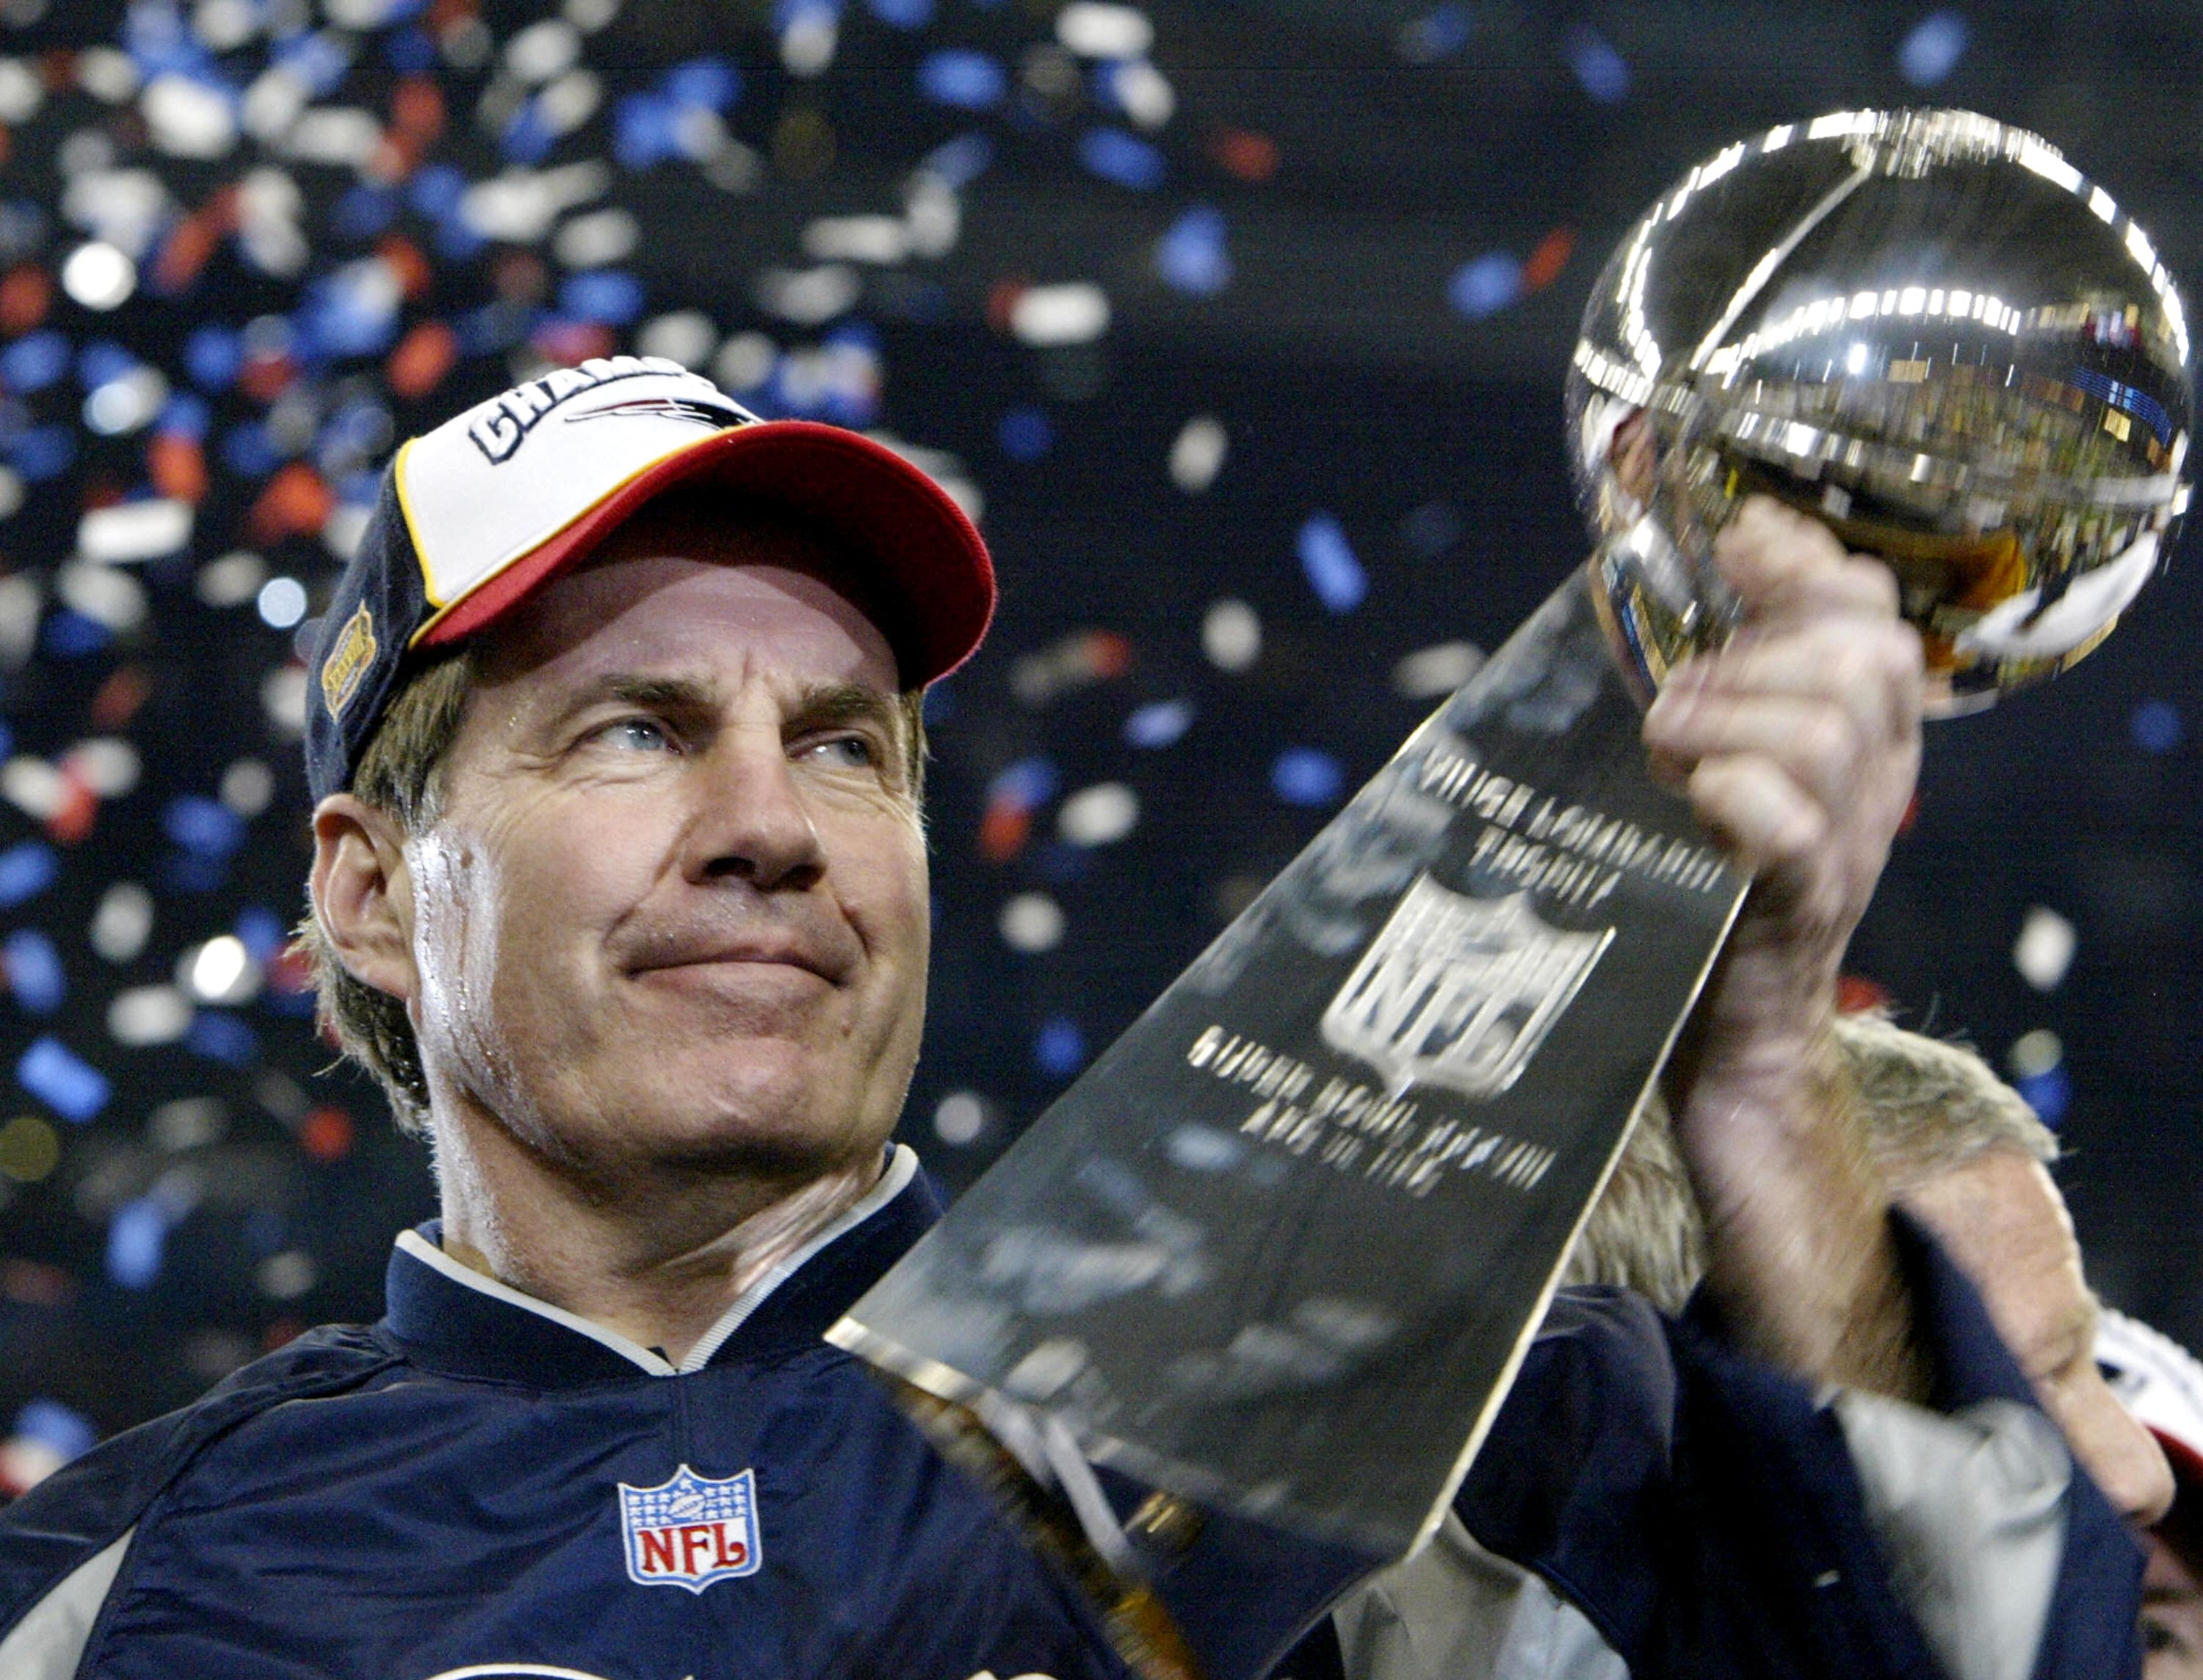 Bill Belichick holds up the Vince Lombardi Trophy after coaching the New England Patriots to a Super Bowl win in 2004. It was the second of his six Super Bowl wins.